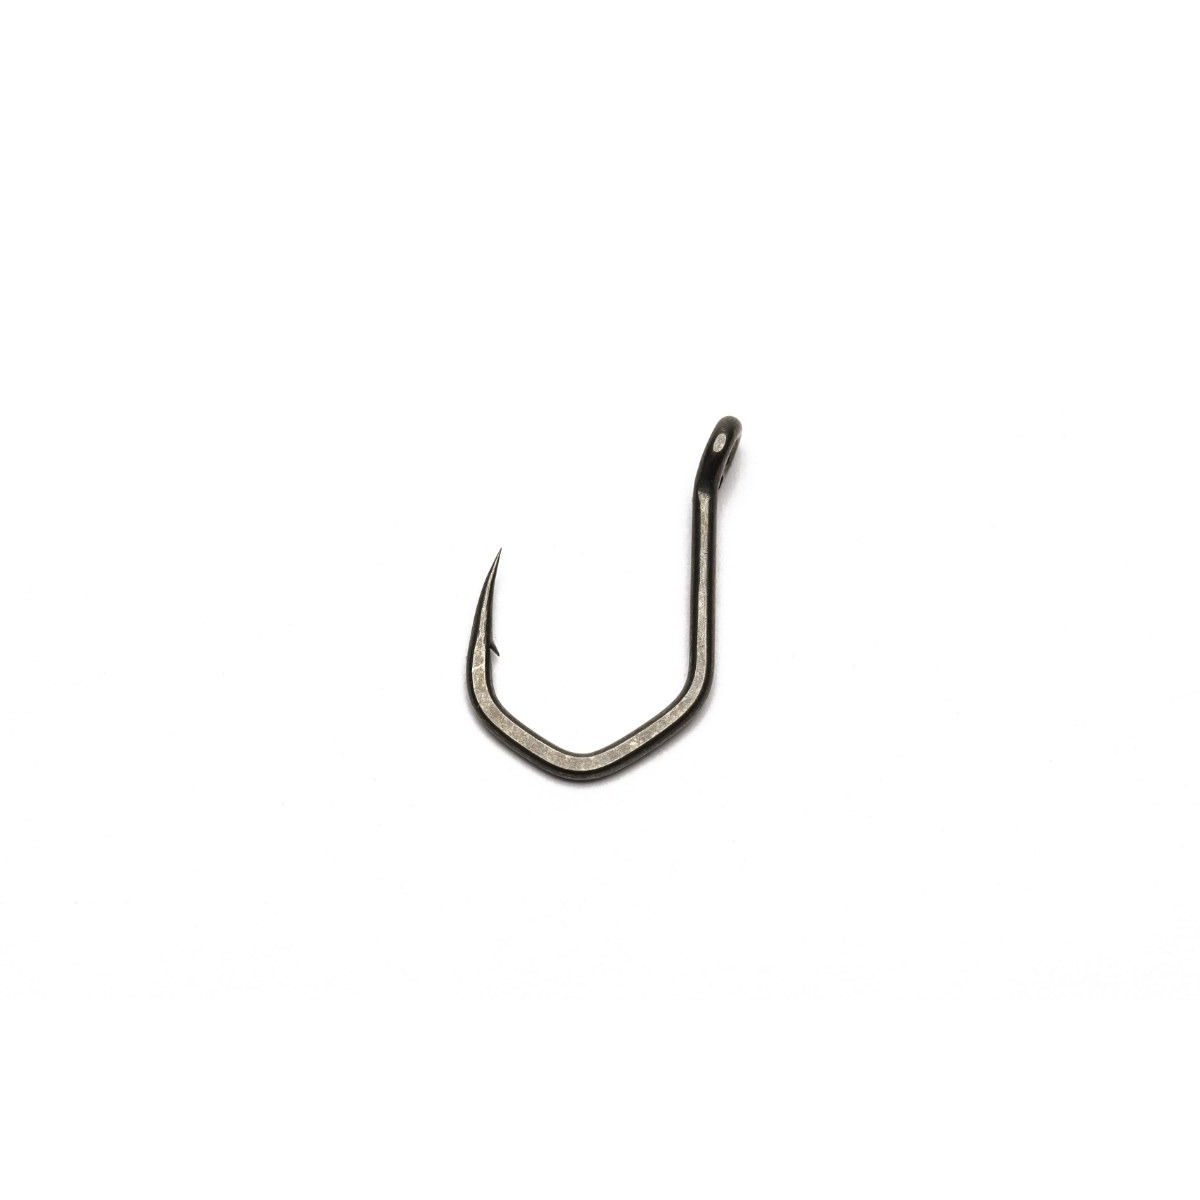 Nash Chod Claw - Size 8 Micro Barbed